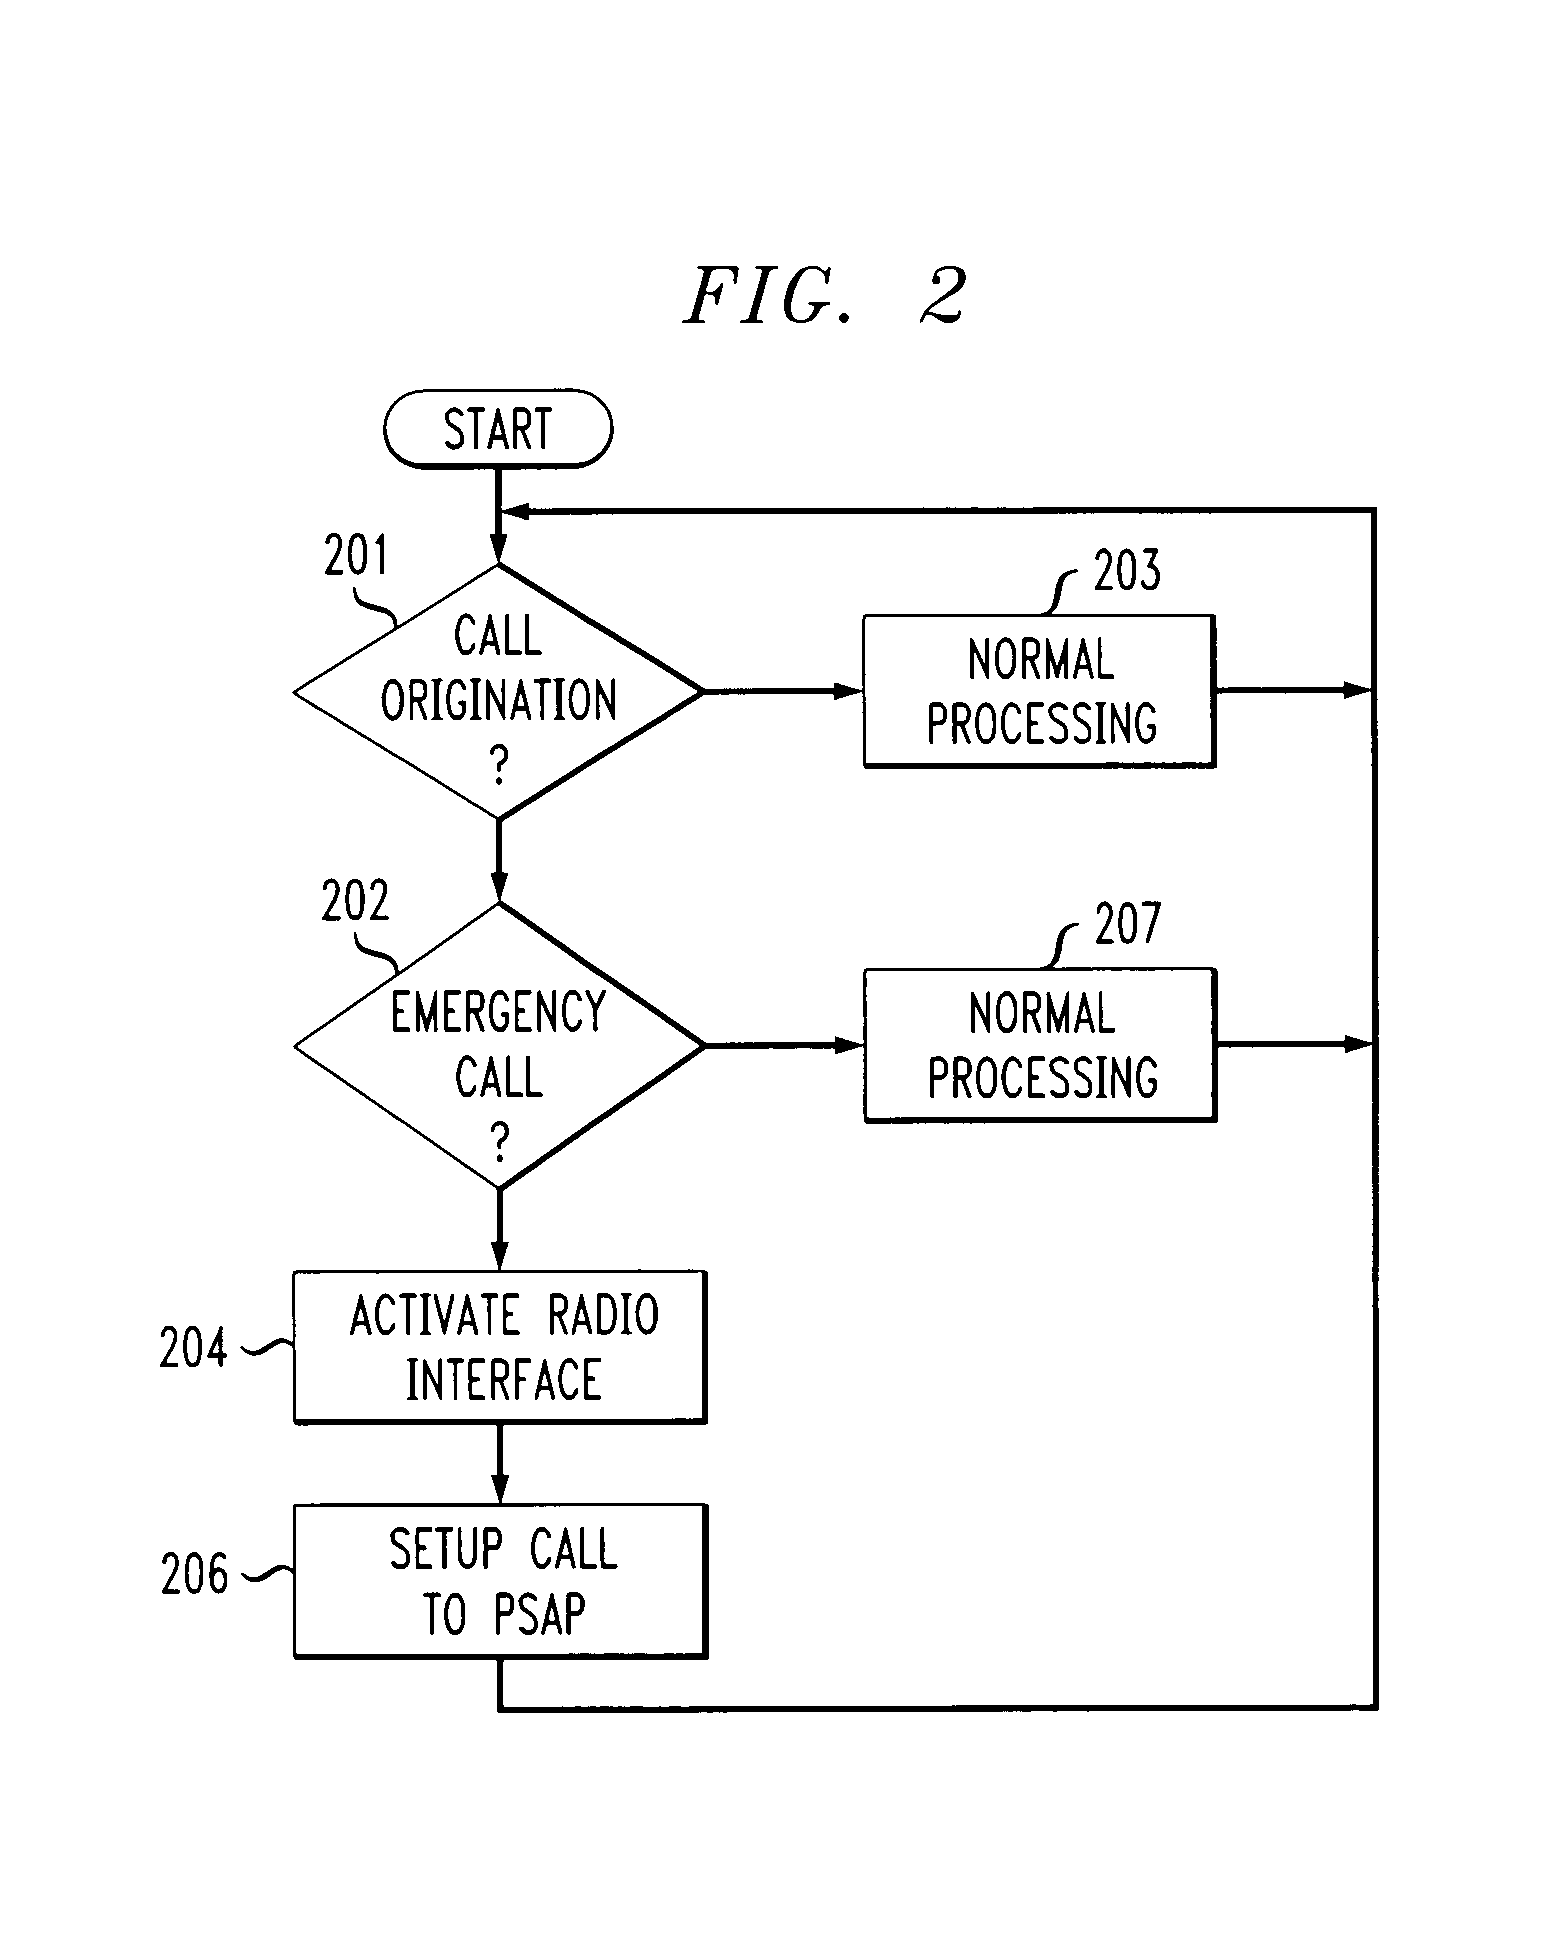 Wireless peripheral device for allowing an IP softphone to place calls to a public safety answering point